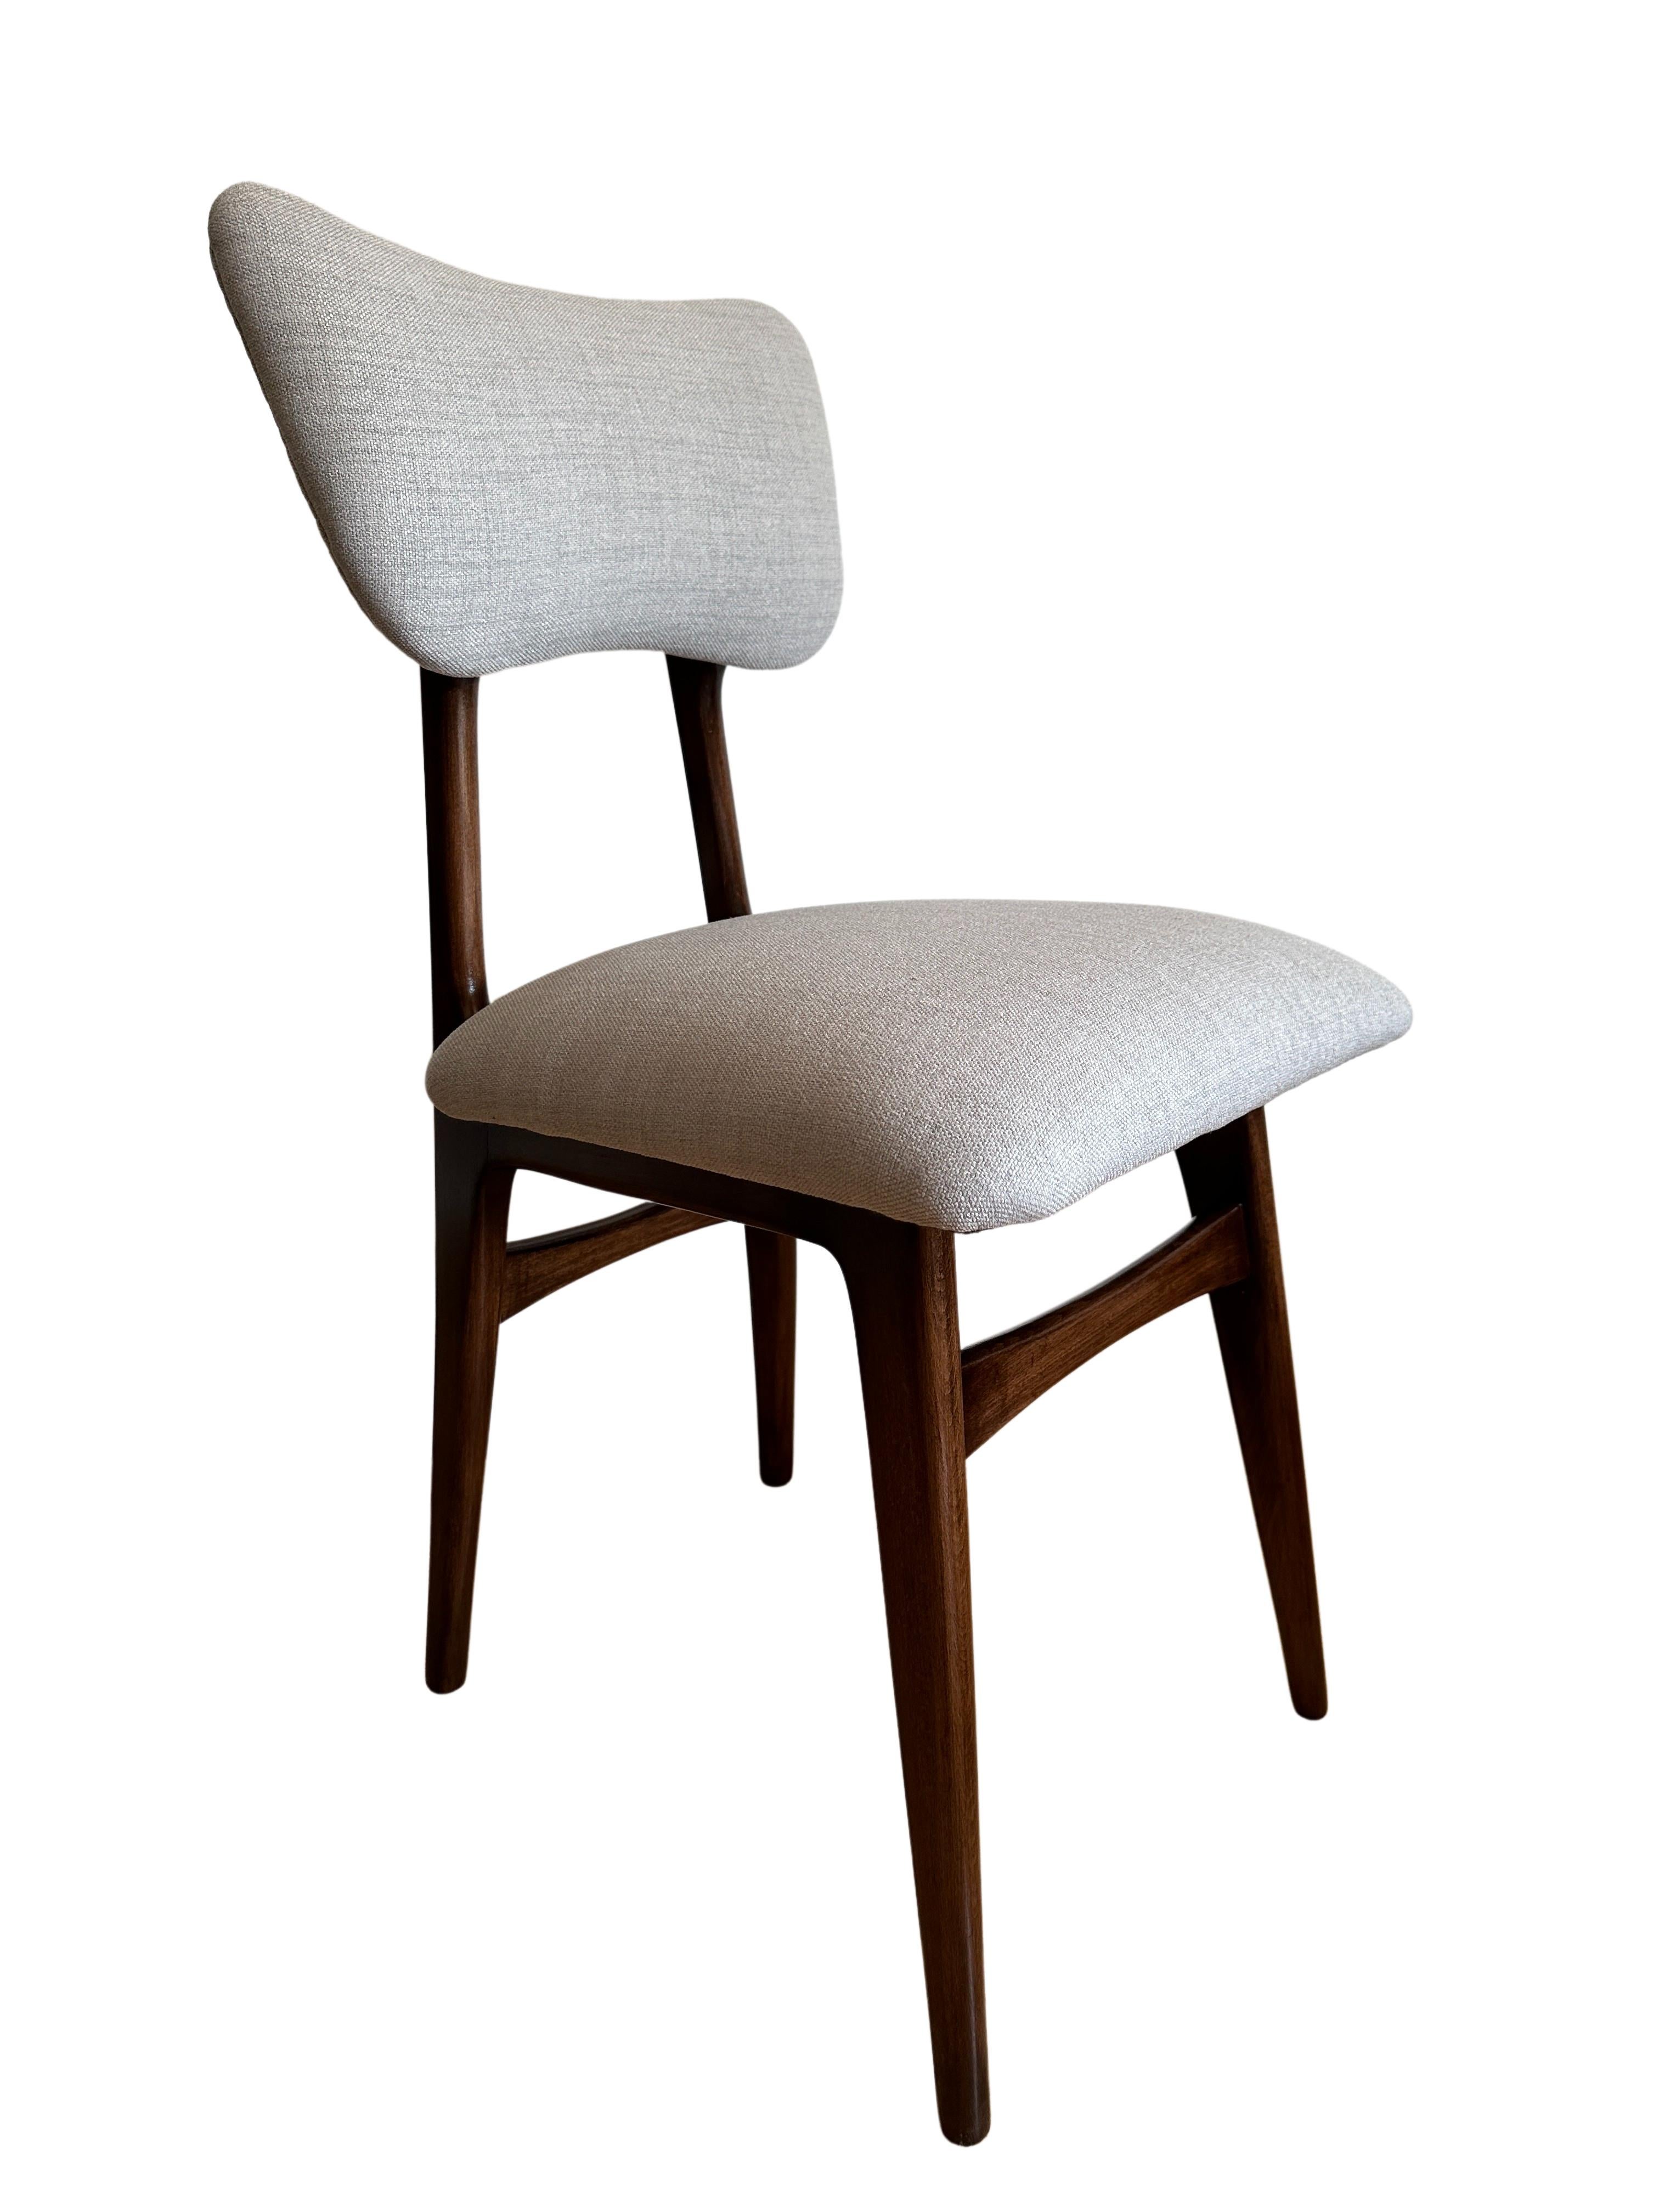 Set of 2 Midcentury Beige and Grey Dining Chairs, Europe, 1960s For Sale 9